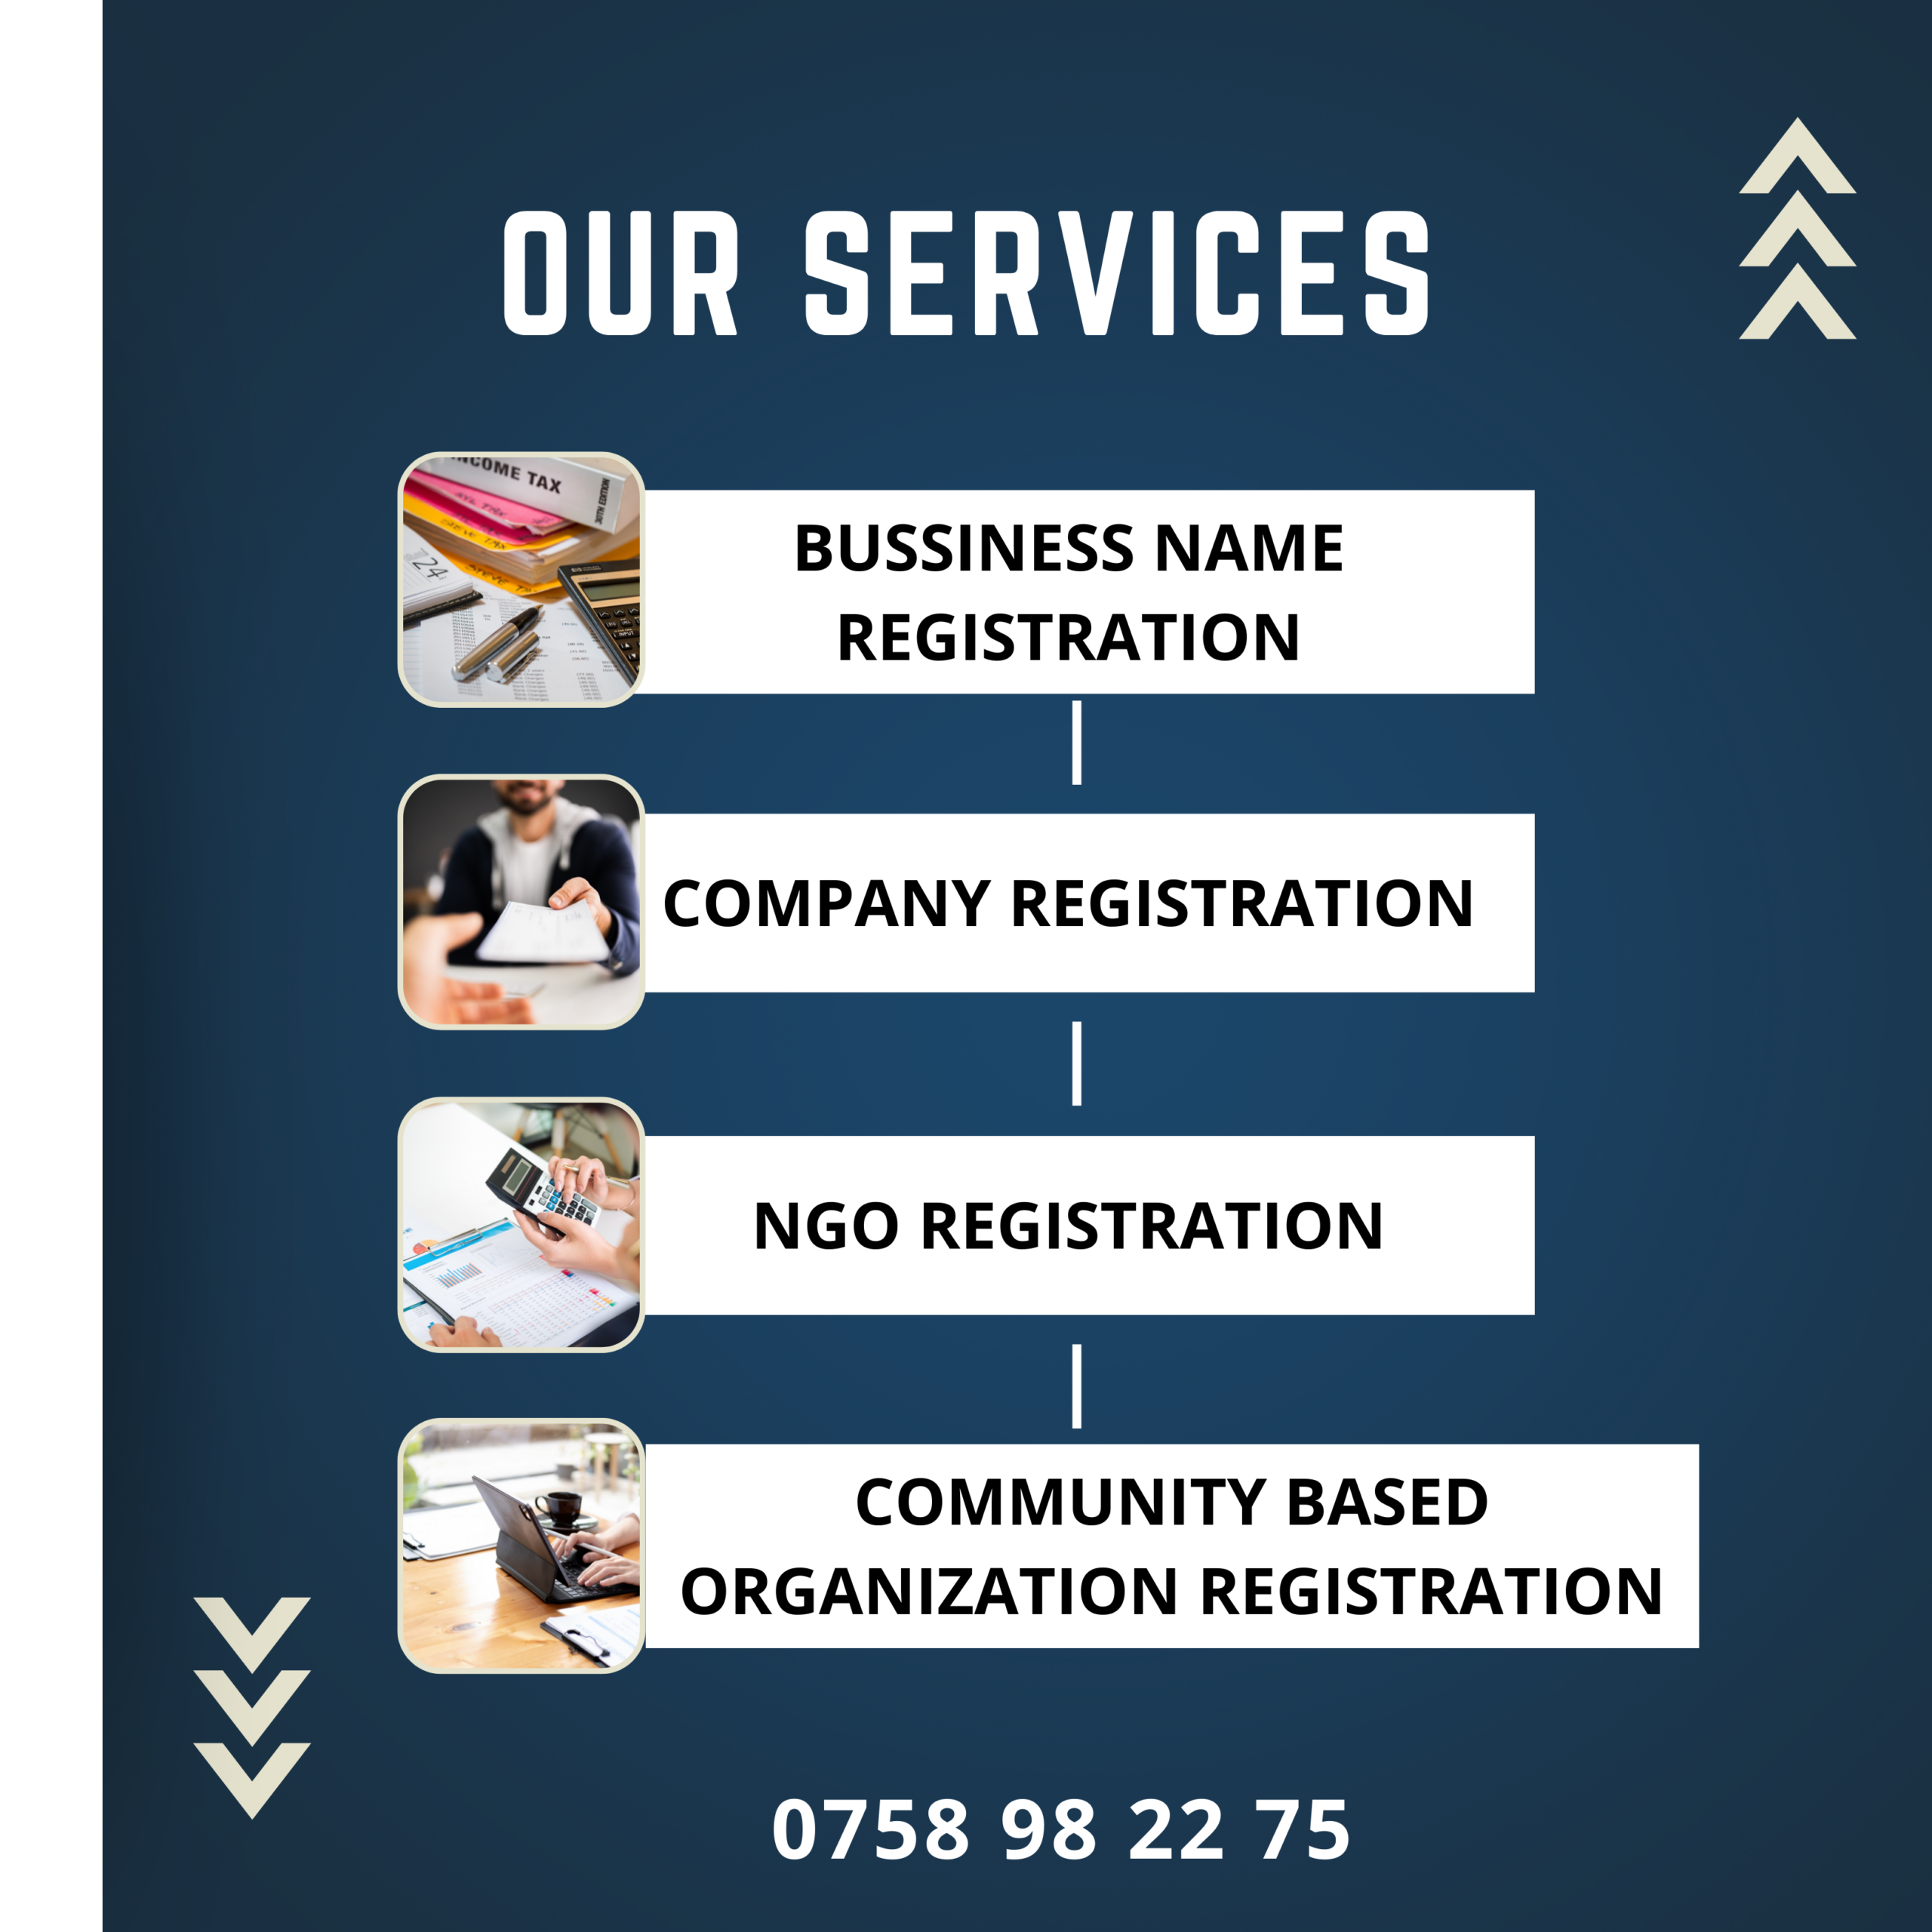 Business Name and Company Registration